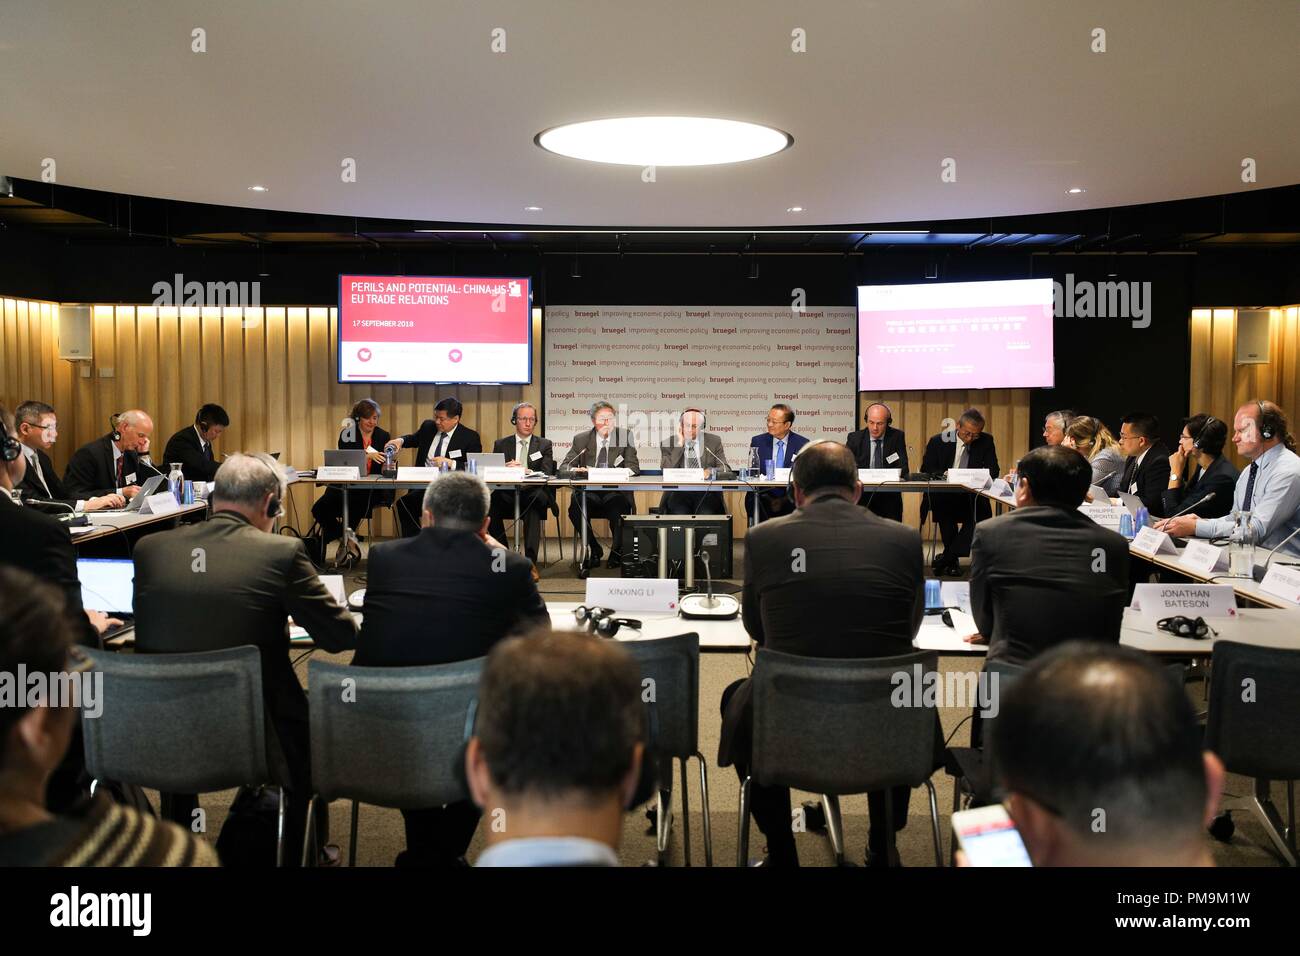 Brussels. 17th Sep, 2018. Photo taken on Sept. 17, 2018 shows a scene of the seminar 'Perils and potential: China-US-EU trade relations' held in Brussels, Belgium. Amid increasing tensions of trade wars worldwide, around 100 leading scholars from China and Europe gathered here in the headquarters of Belgian think tank Bruegel Monday, calling on China and Europe to reduce misunderstanding via open and fair discussions on all levels. Credit: Zheng Huansong/Xinhua/Alamy Live News Stock Photo